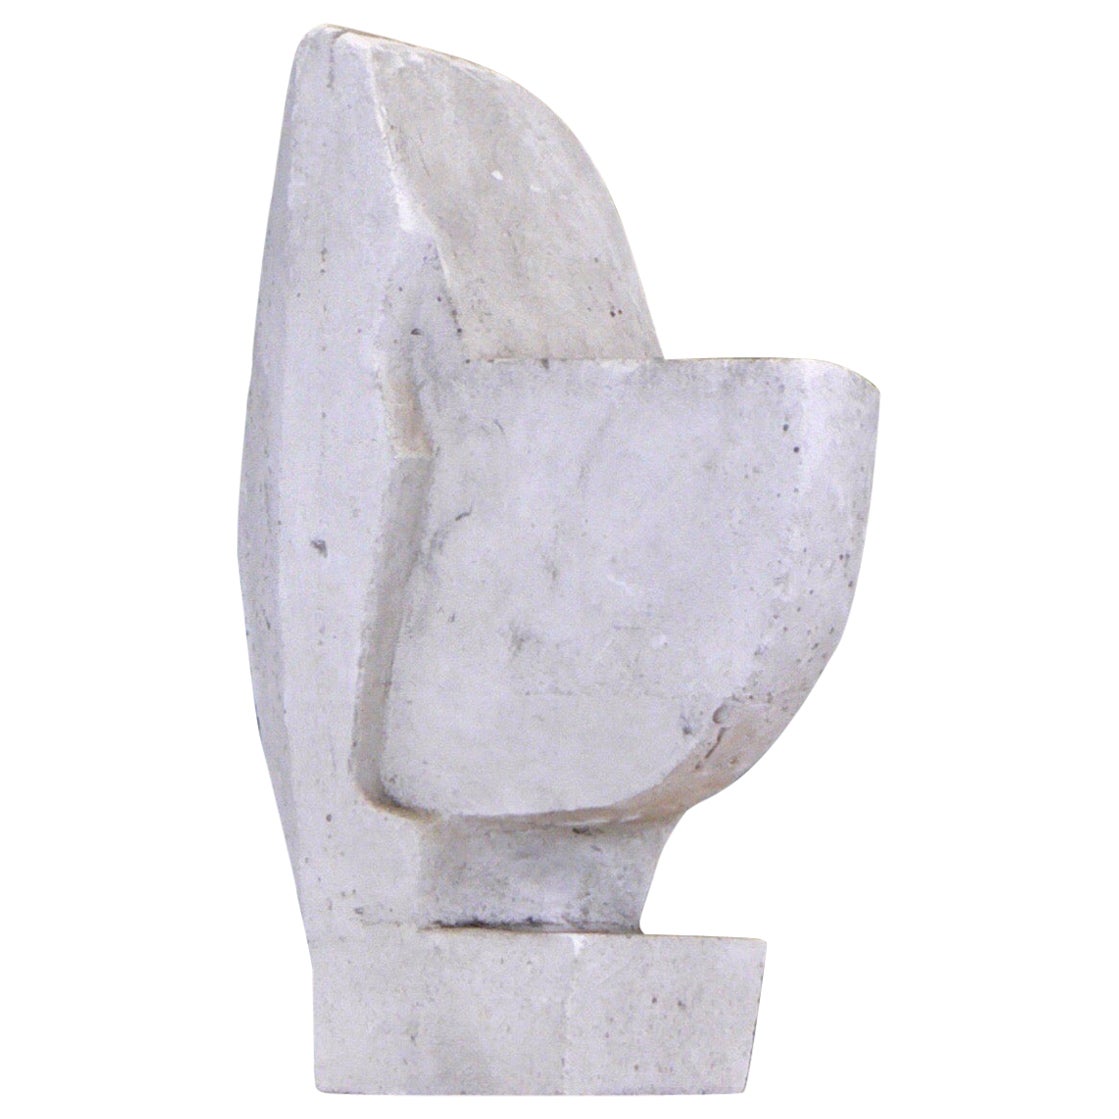 Abstract plaster sculpture from the 1950s with a French origin.